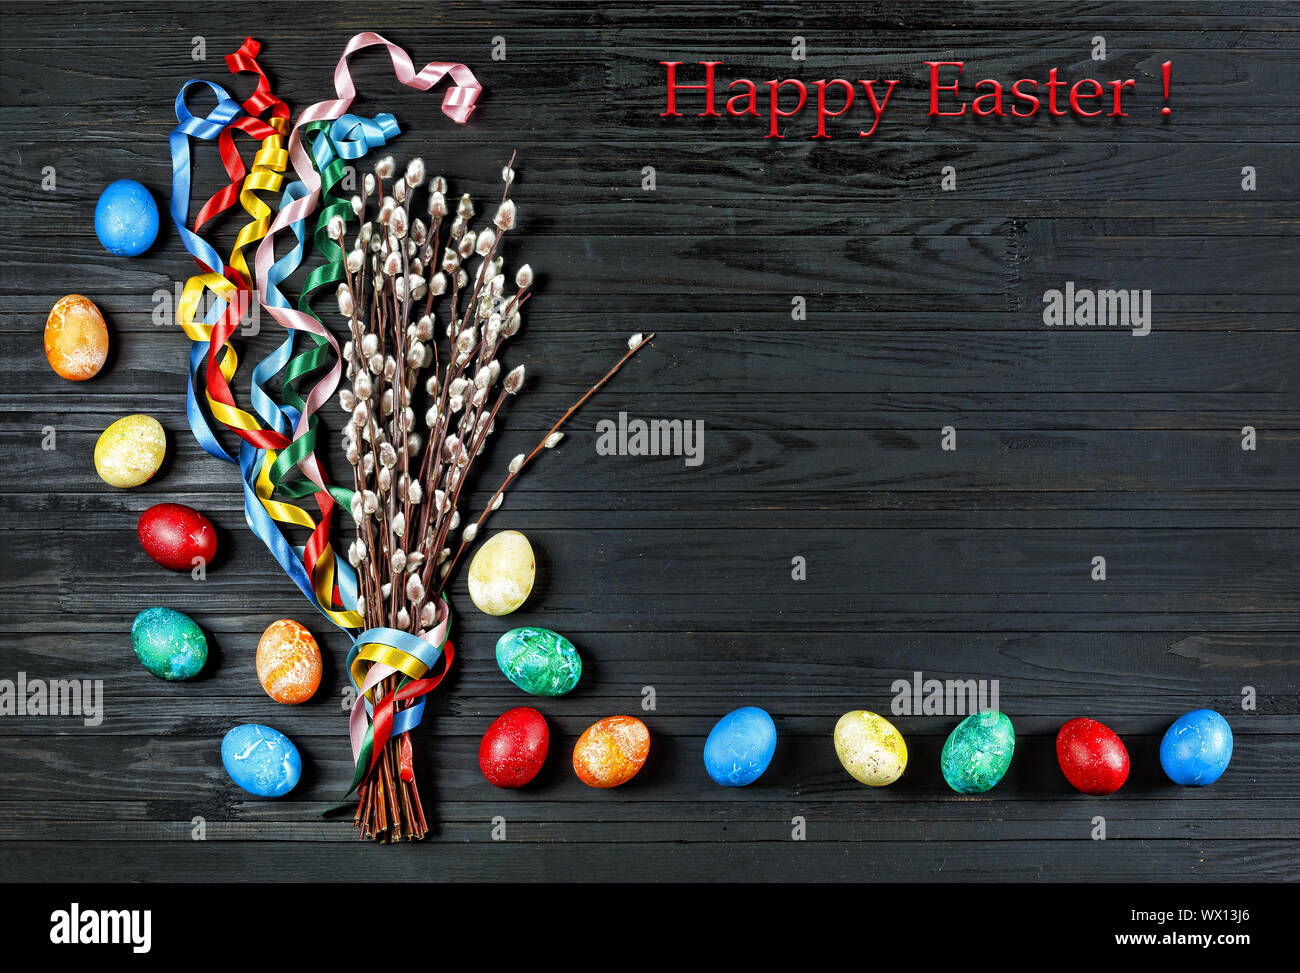 Easter, Easter symbols, Easter eggs,  pussy willow , colored ribbons, black background, wooden backg Stock Photo